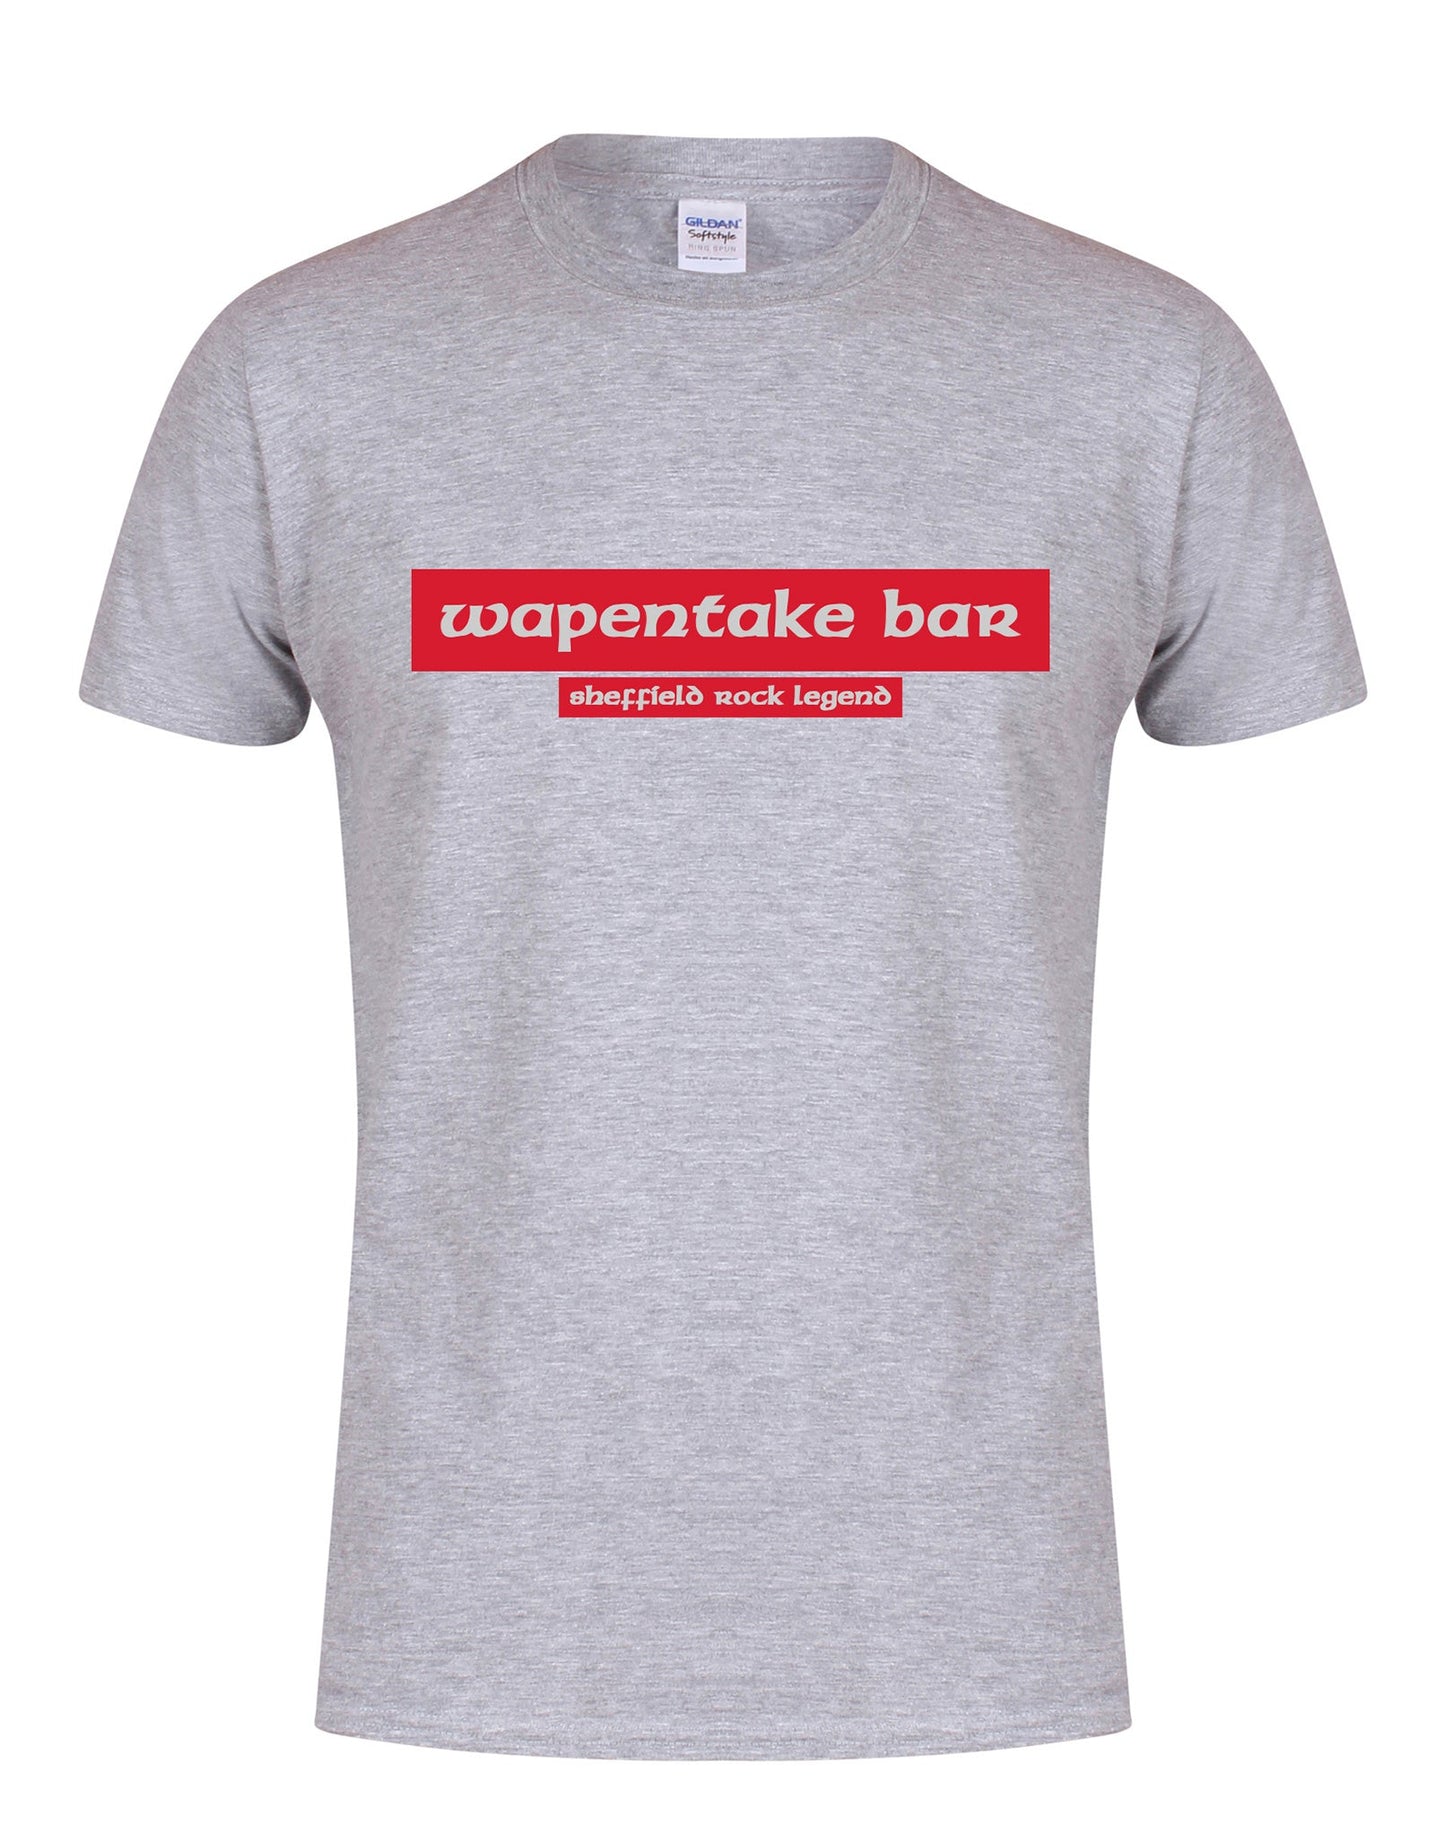 Wapentake original sign unisex fit T-shirt - various colours - Dirty Stop Outs